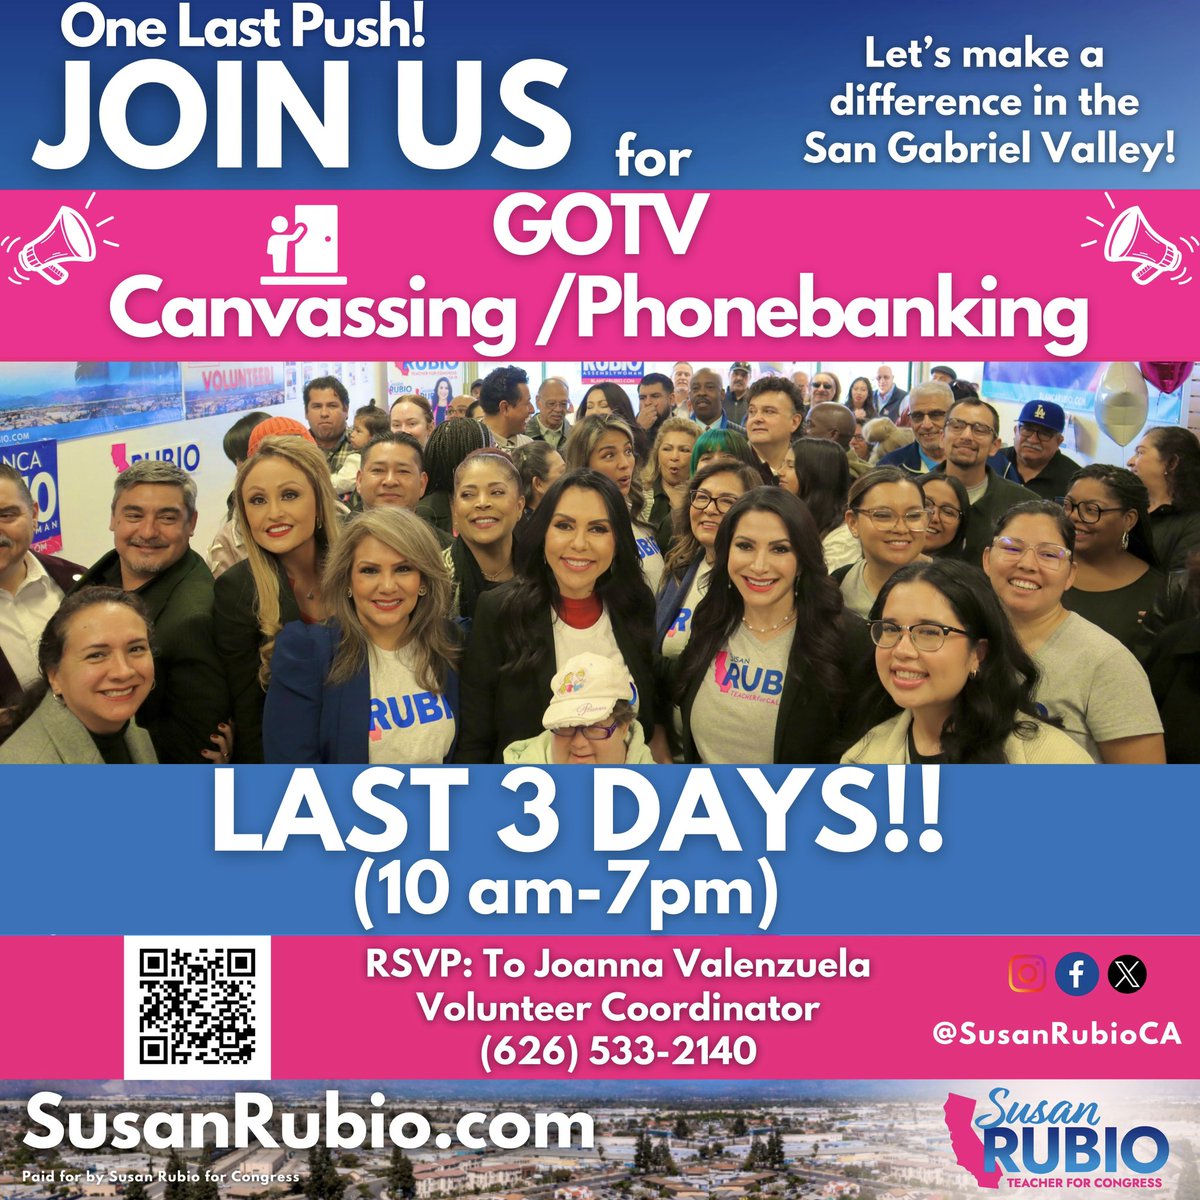 Just 2 more days before election day, WE NEED ALL THE HELP POSSIBLE! Final push to make a significant impact and keep our seat secure.Our efforts are what ensure safeguarding our community from outside influences that do not represent our values or interests. #TEAMRUBIO